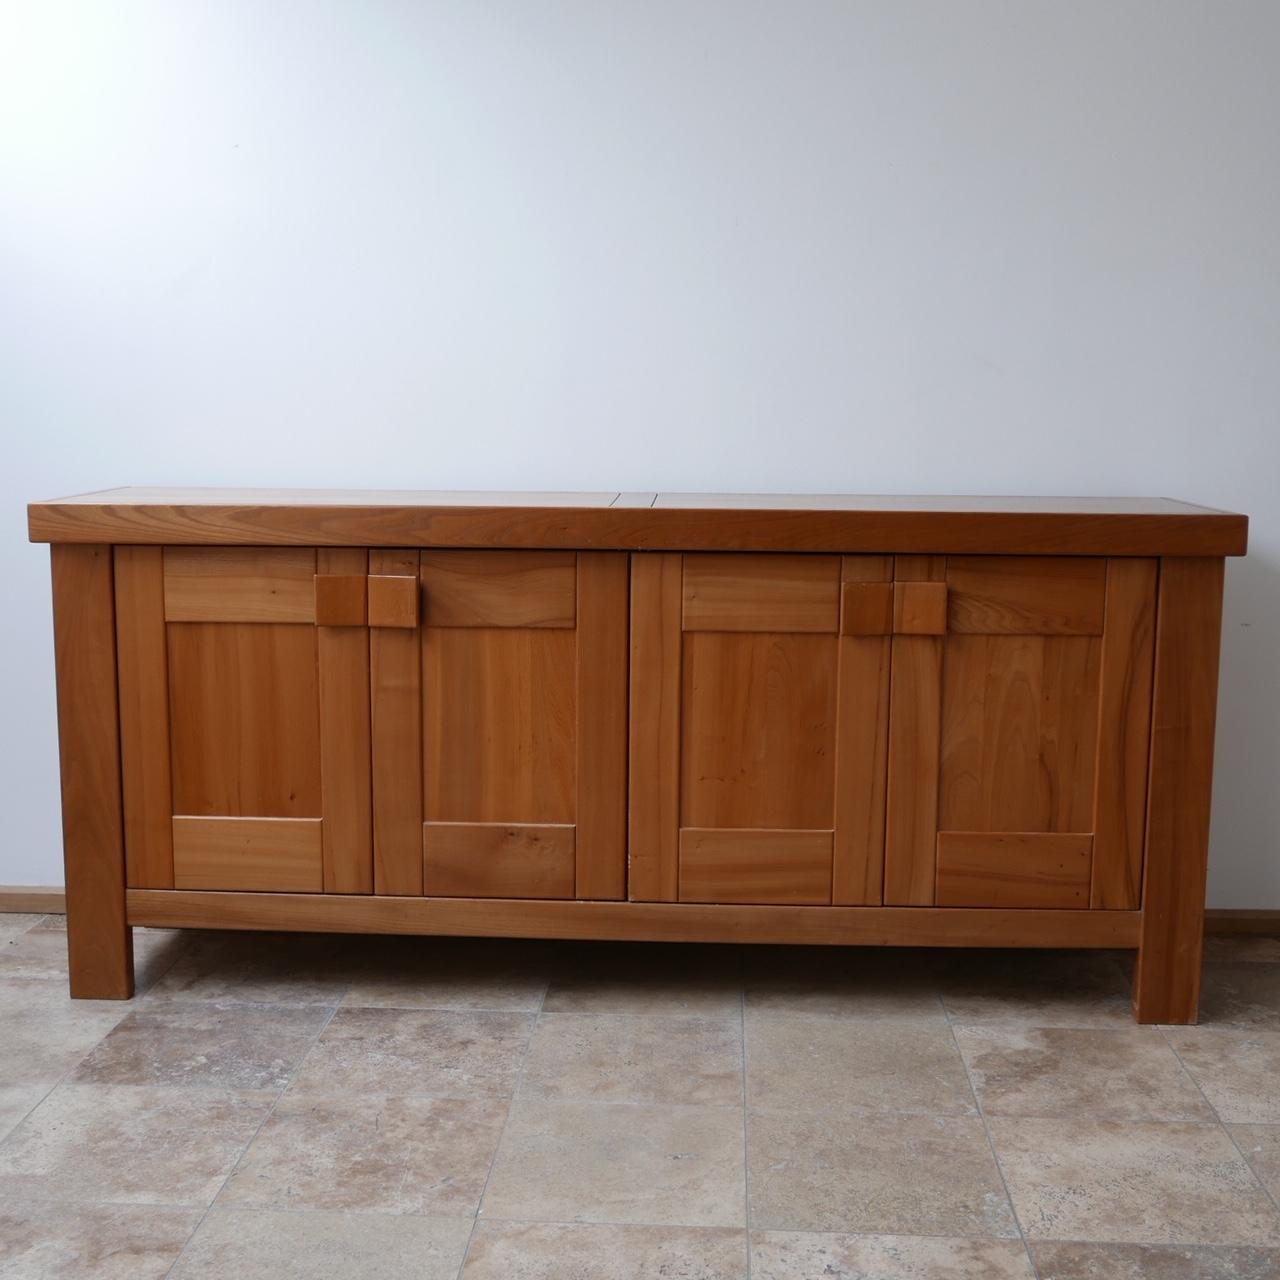 A scarce large credenza by French design company Maison Regain,

Formed from Elm, circa 1970s.

Maison Regain were the main competitive force to Pierre Chapo and designed many similar pieces in the circa 1970s in France.

Good quality